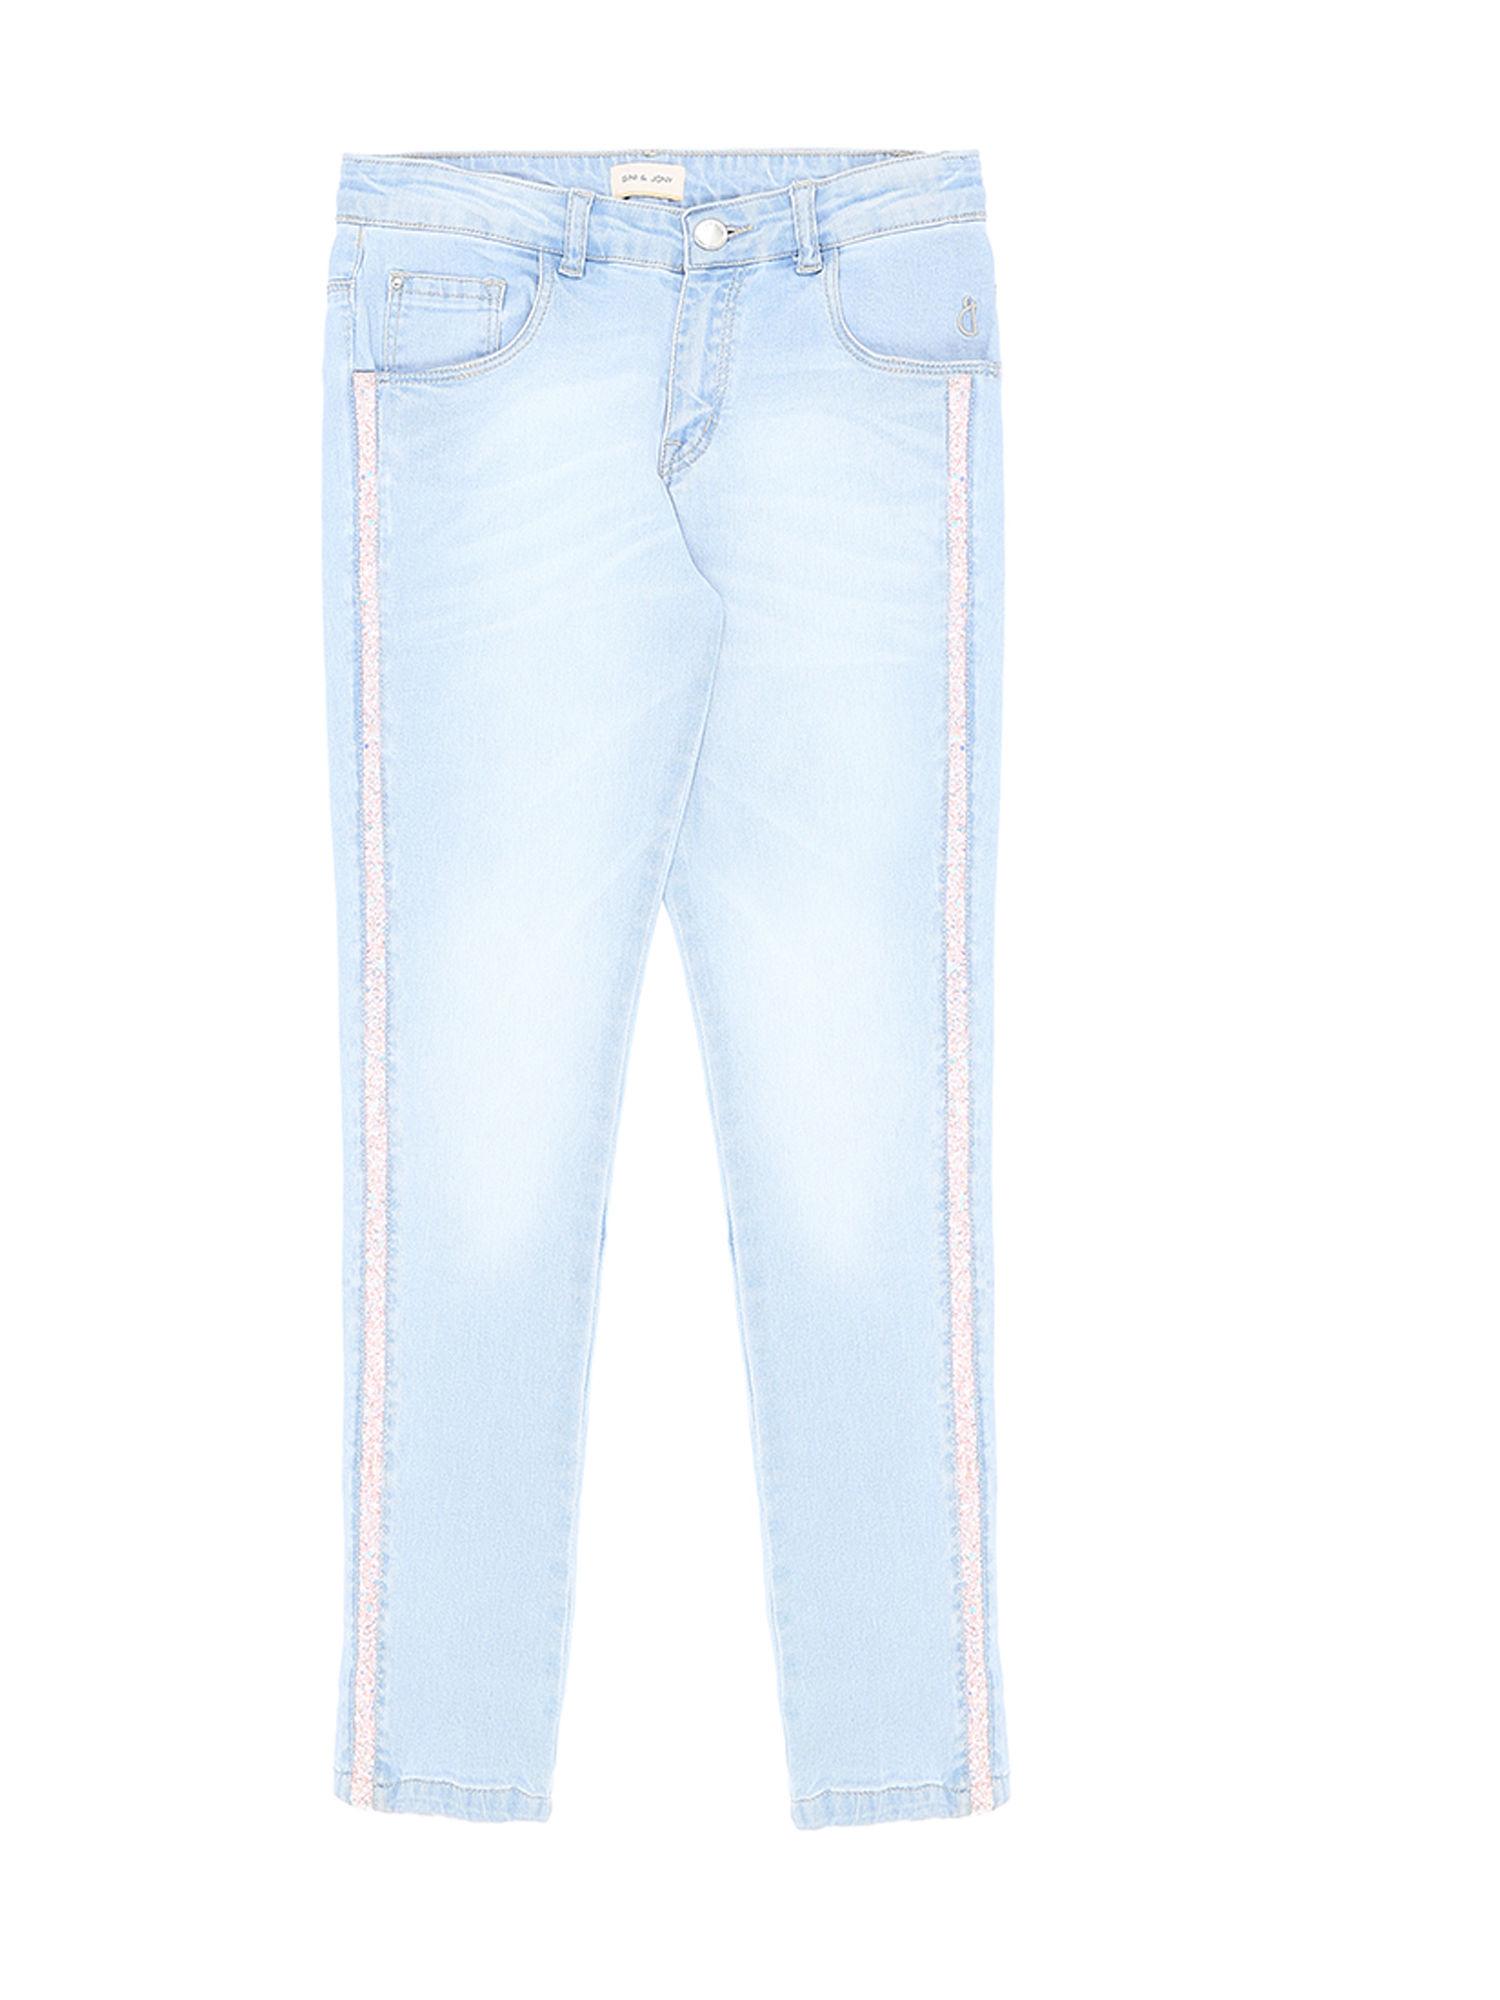 light-blue-bejeweled-side-taping-jeans